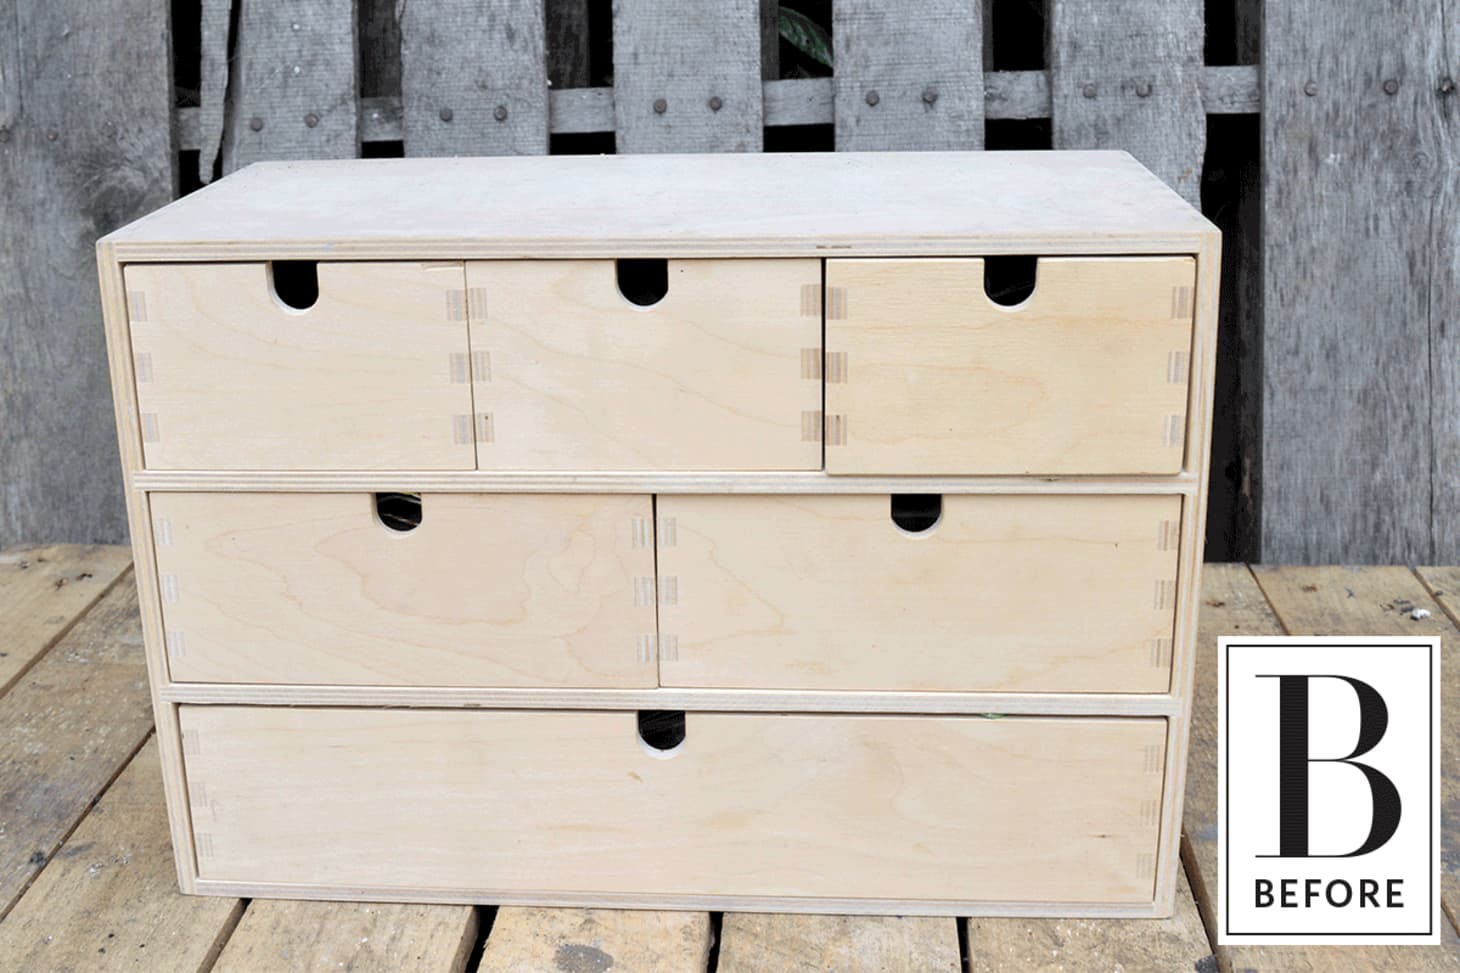 Unfinished IKEA Drawers Get a VintageInspired Makeover Apartment Therapy